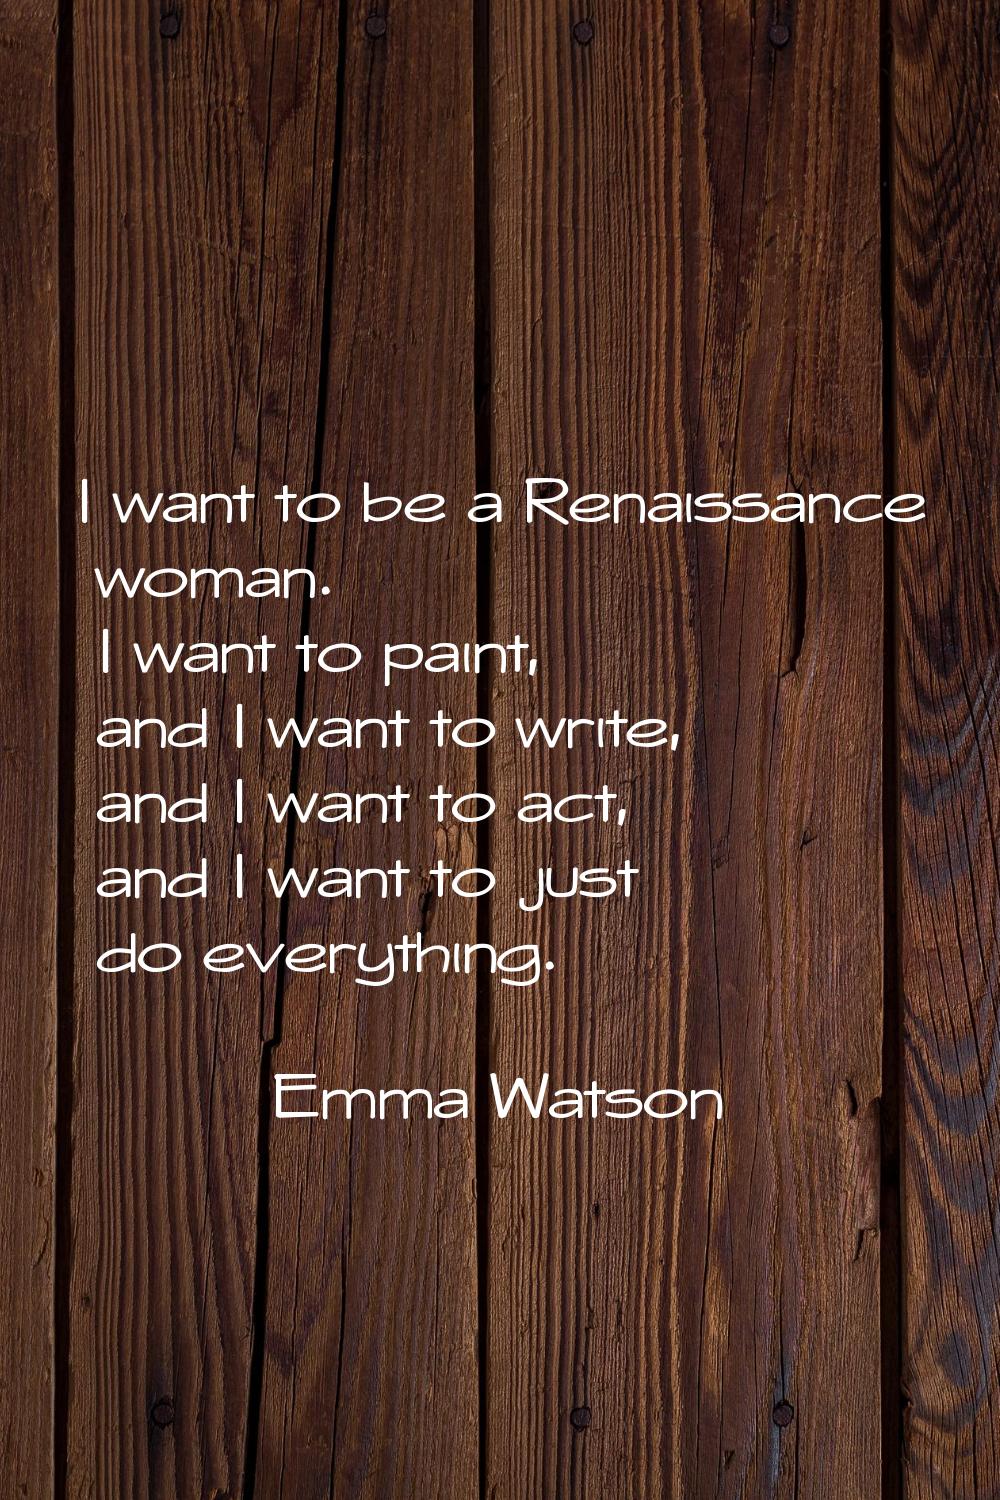 I want to be a Renaissance woman. I want to paint, and I want to write, and I want to act, and I wa